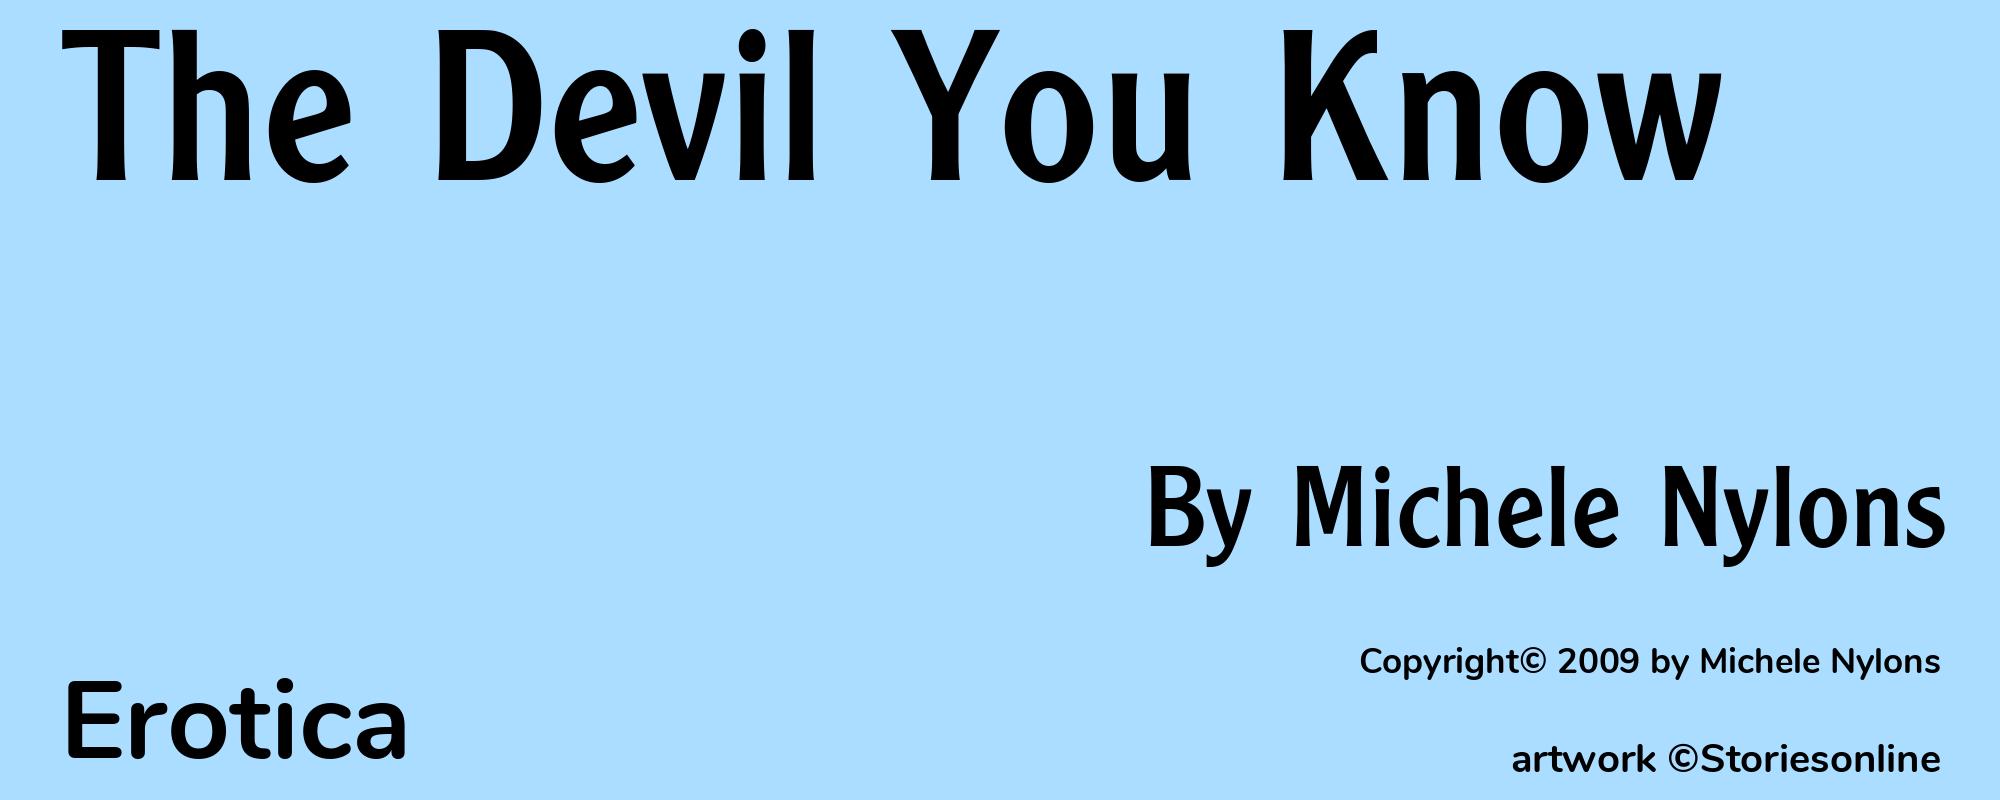 The Devil You Know - Cover